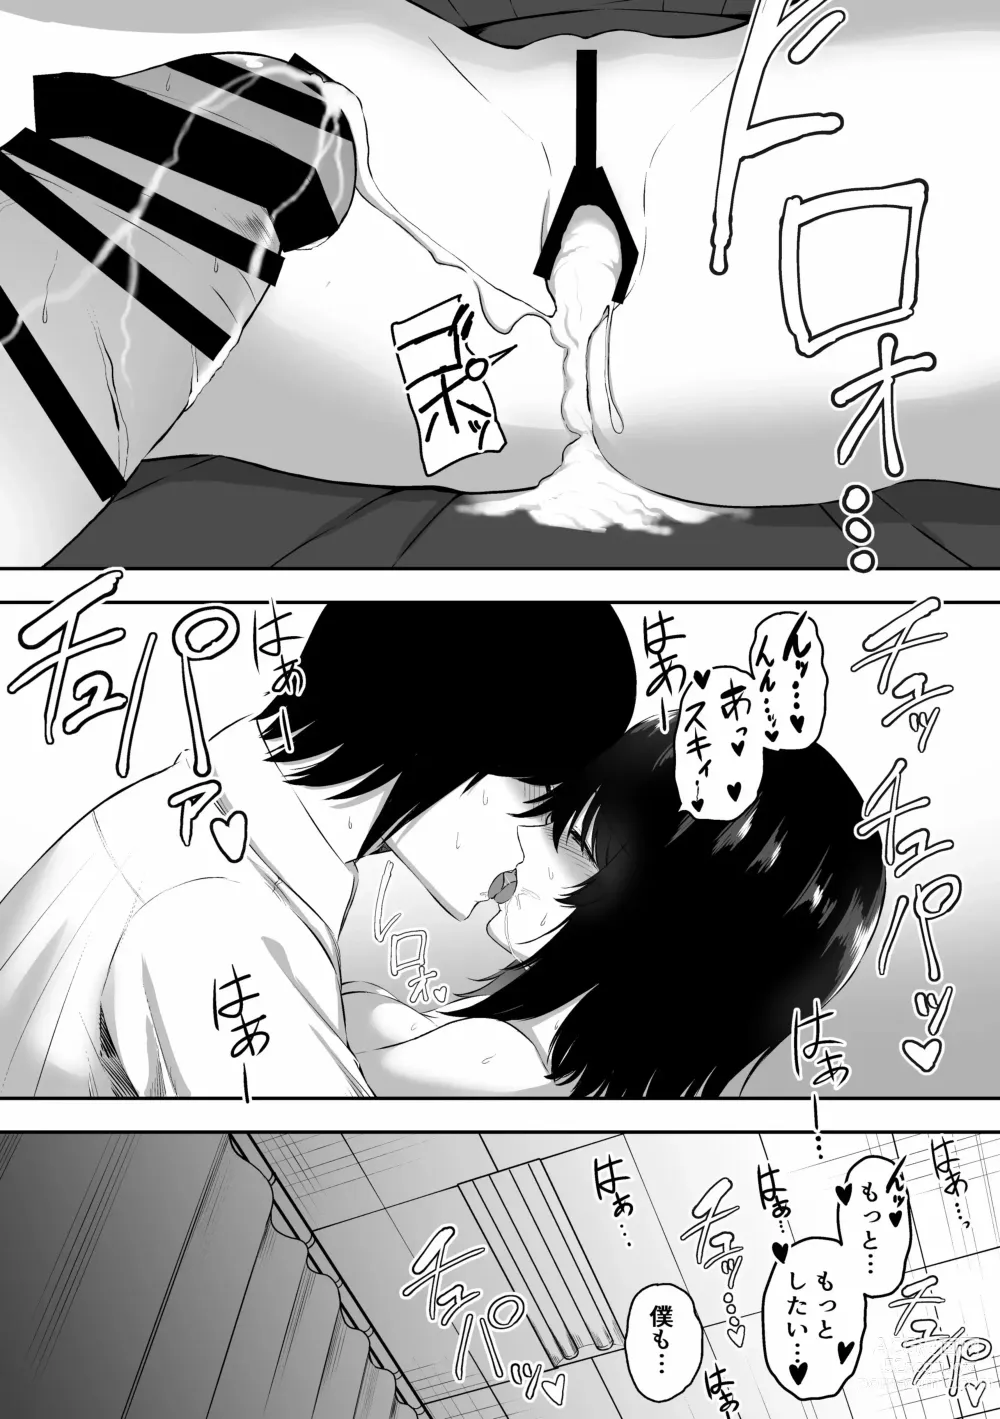 Page 153 of doujinshi 三食纳豆辣妹